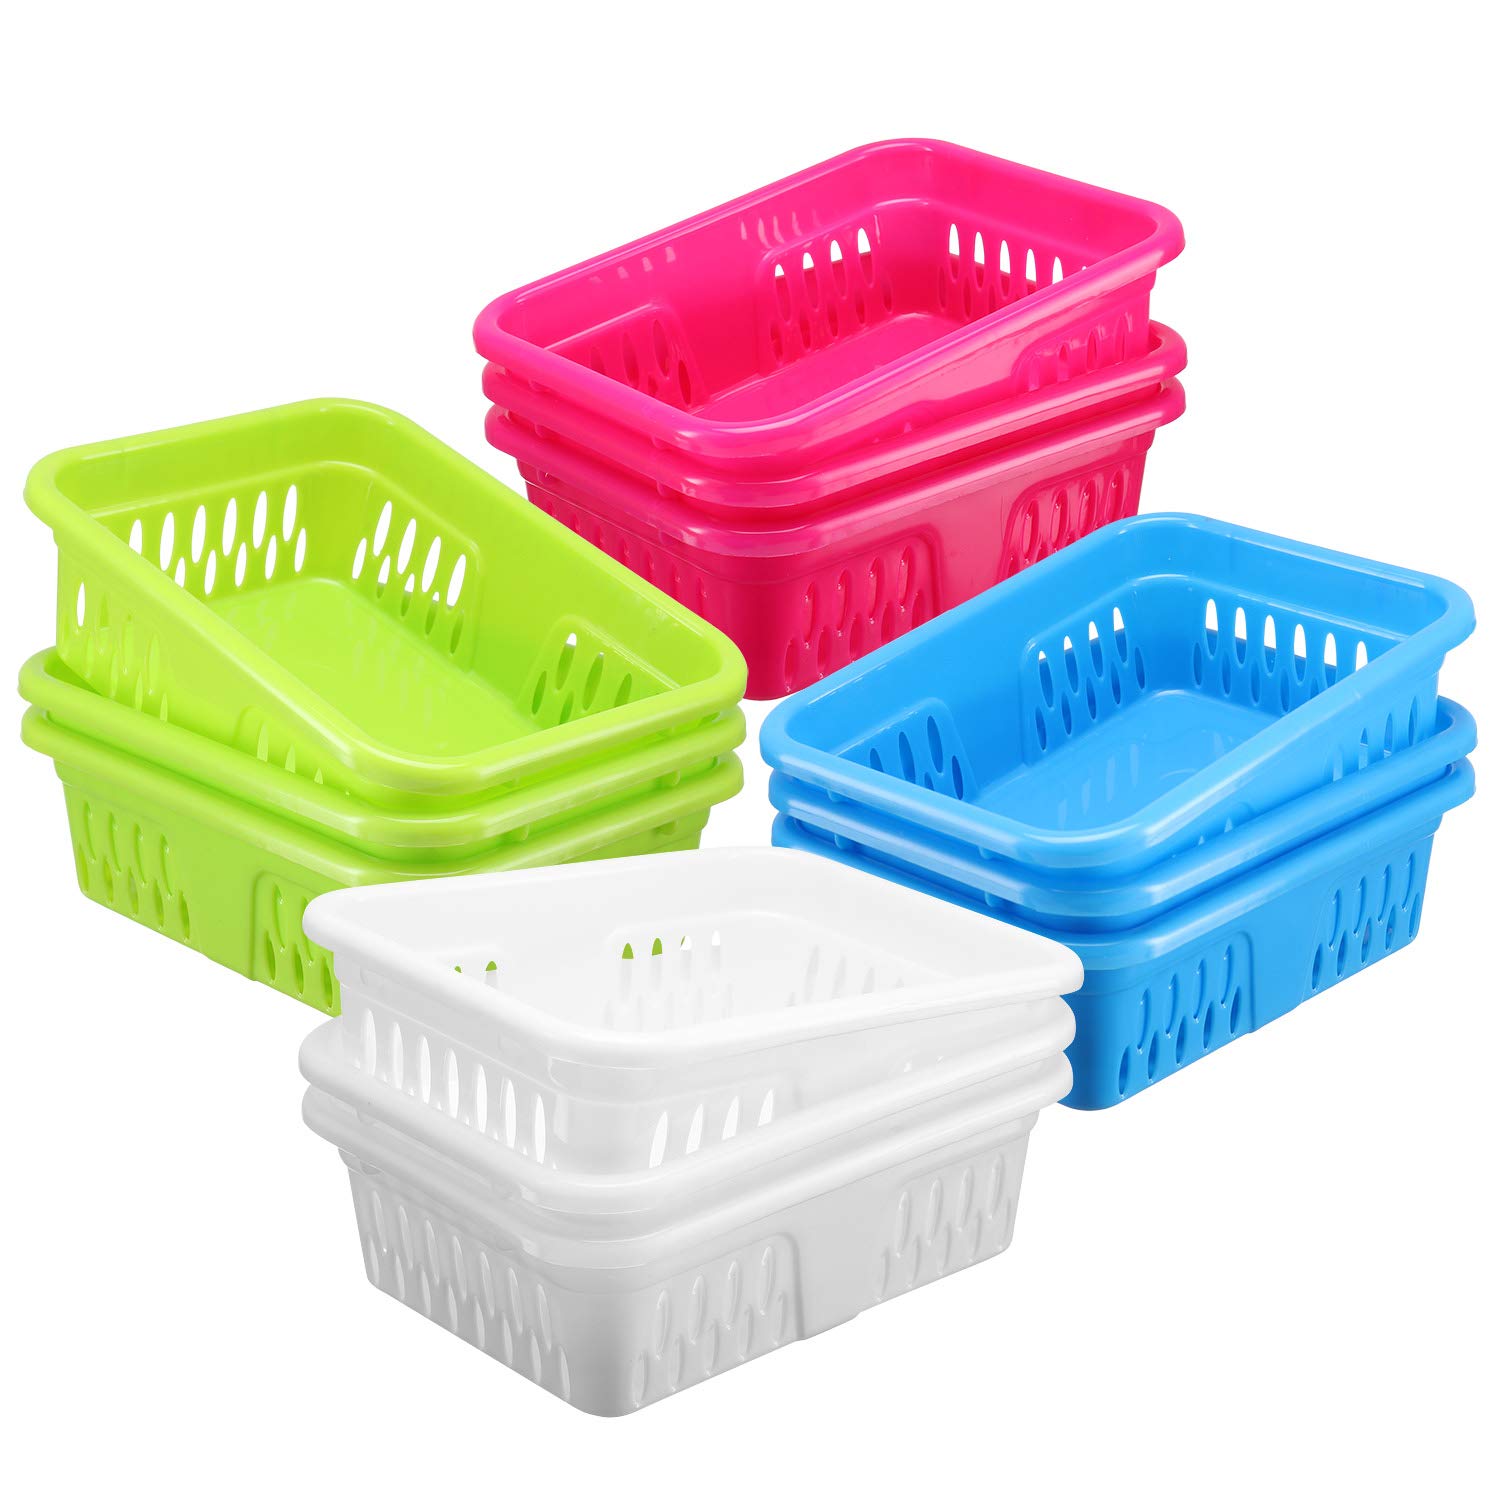 Where to Find Cheap Plastic Storage Bins? Storables